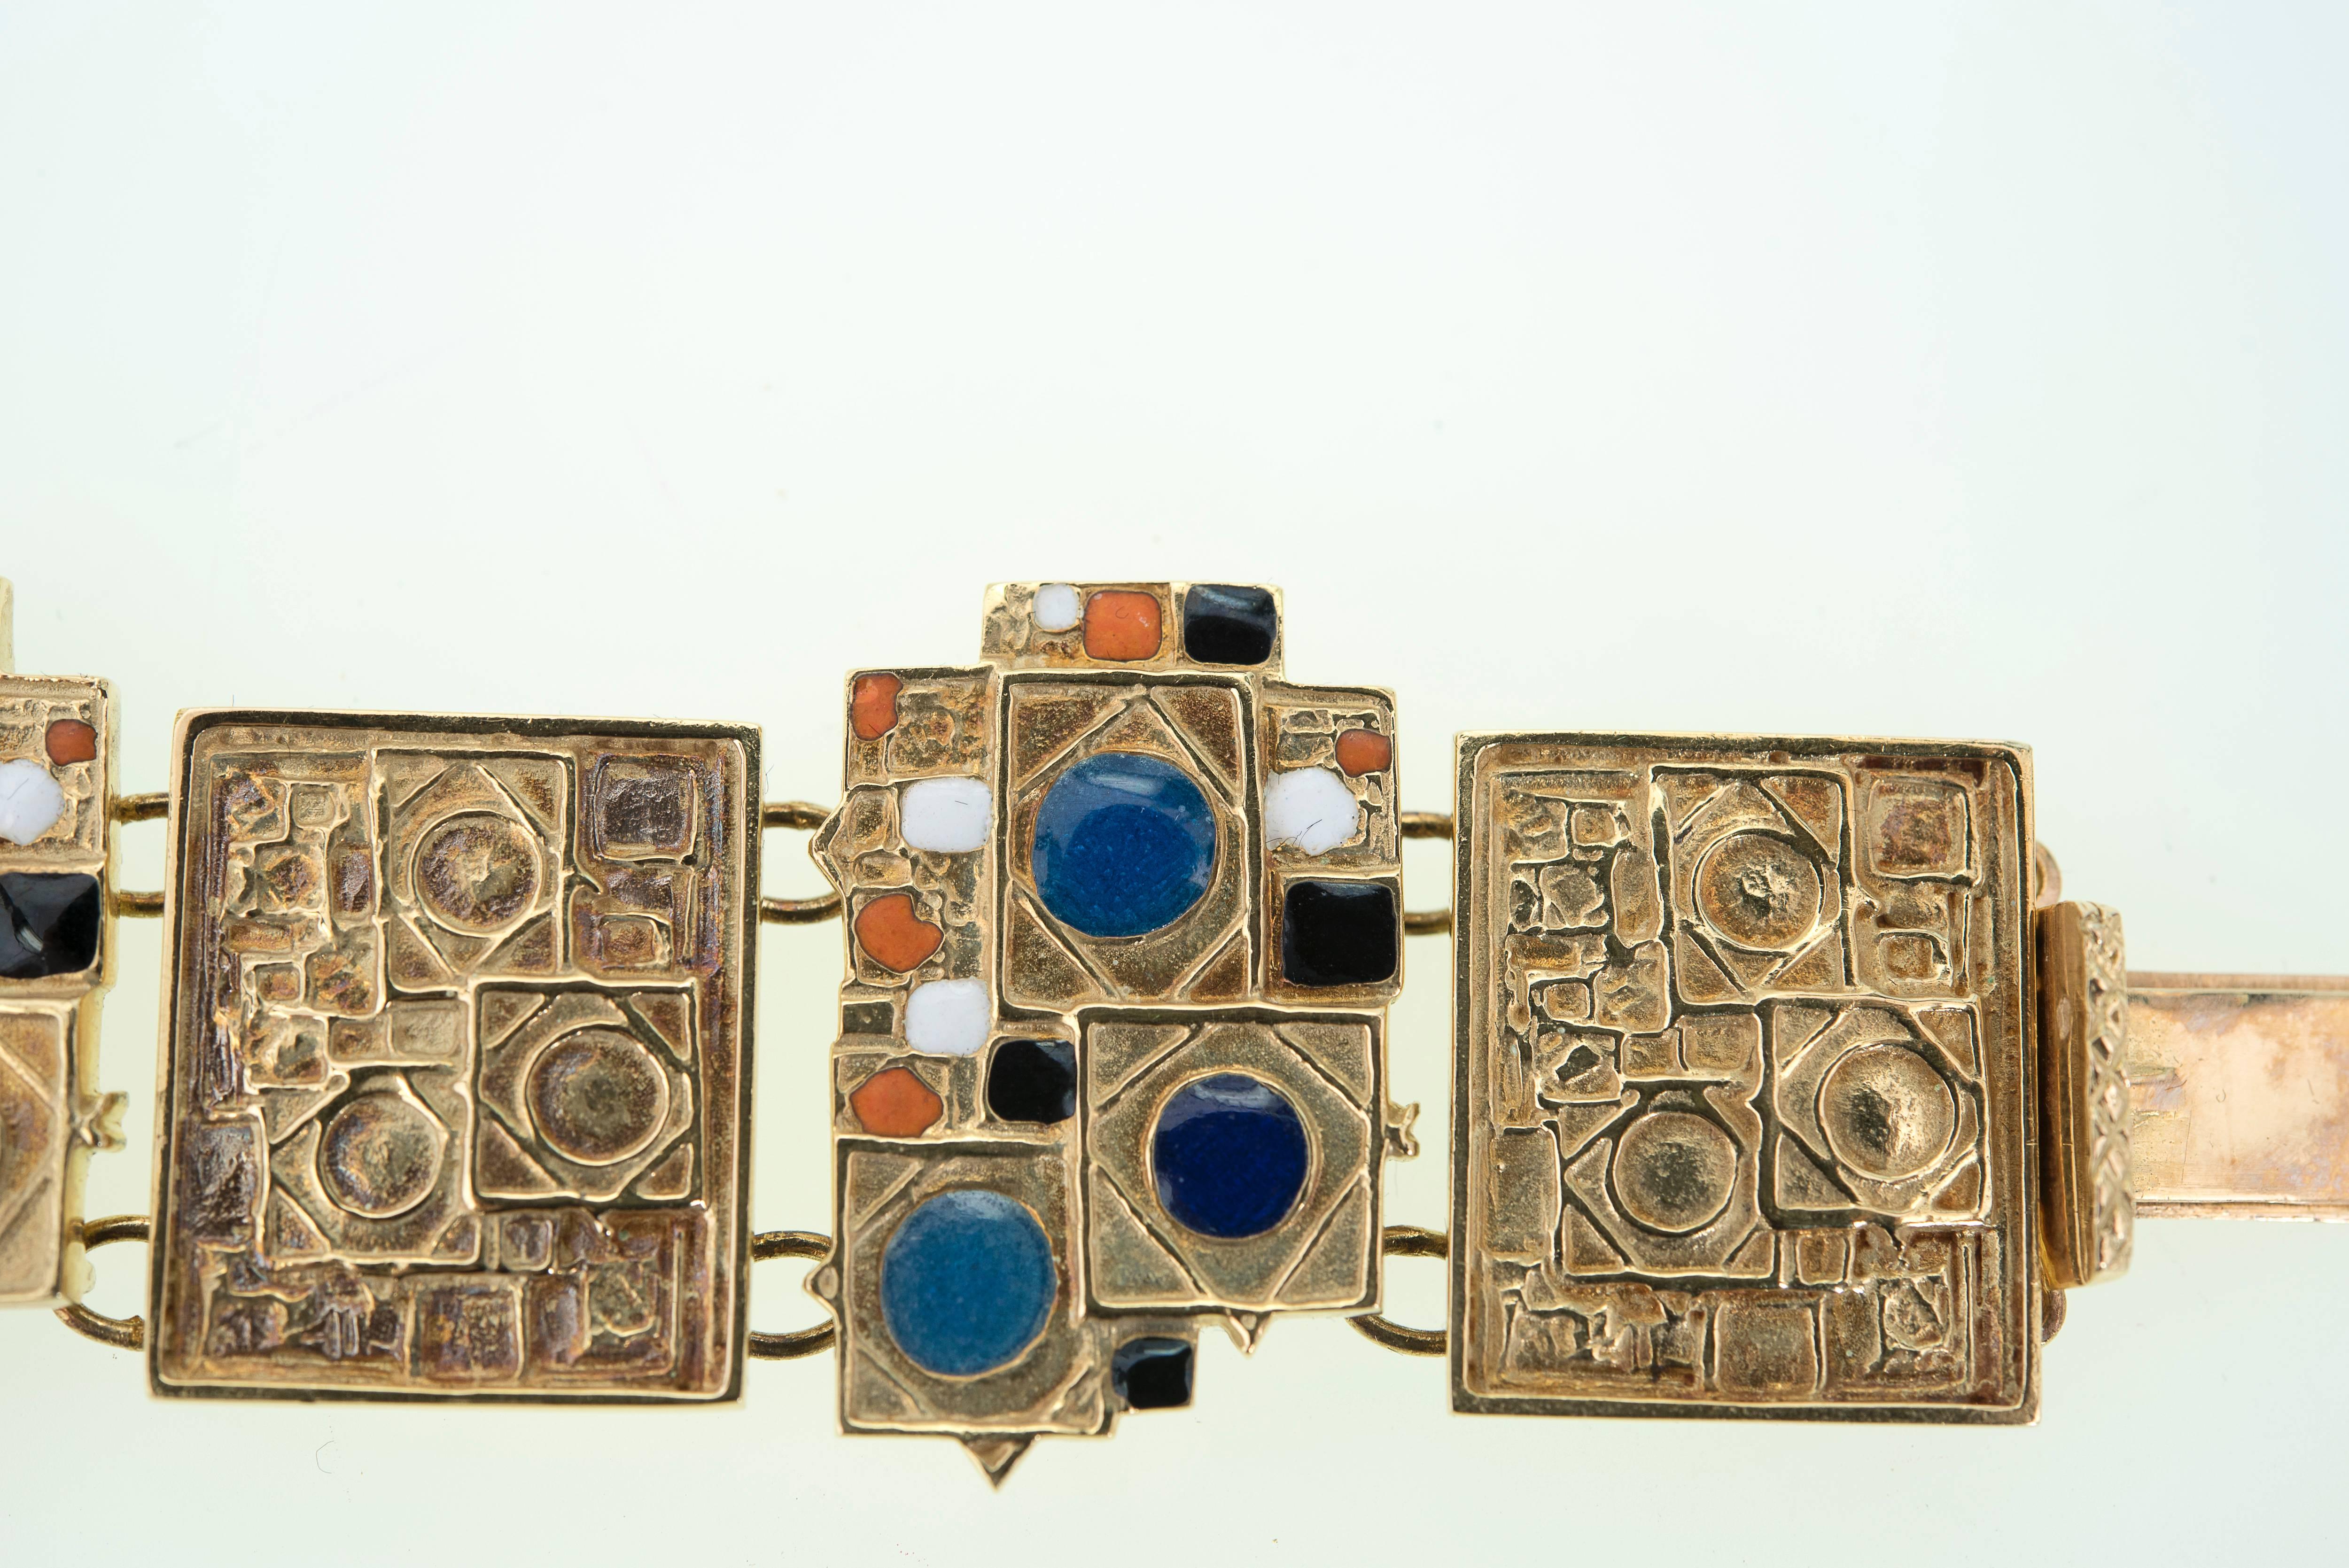 Artist jewelry.
A 18K gold and enamel abstract bracelet designed by French-Romanian abstract artist Natalia Dumitresco (1915-1997).
limited edition 24/50